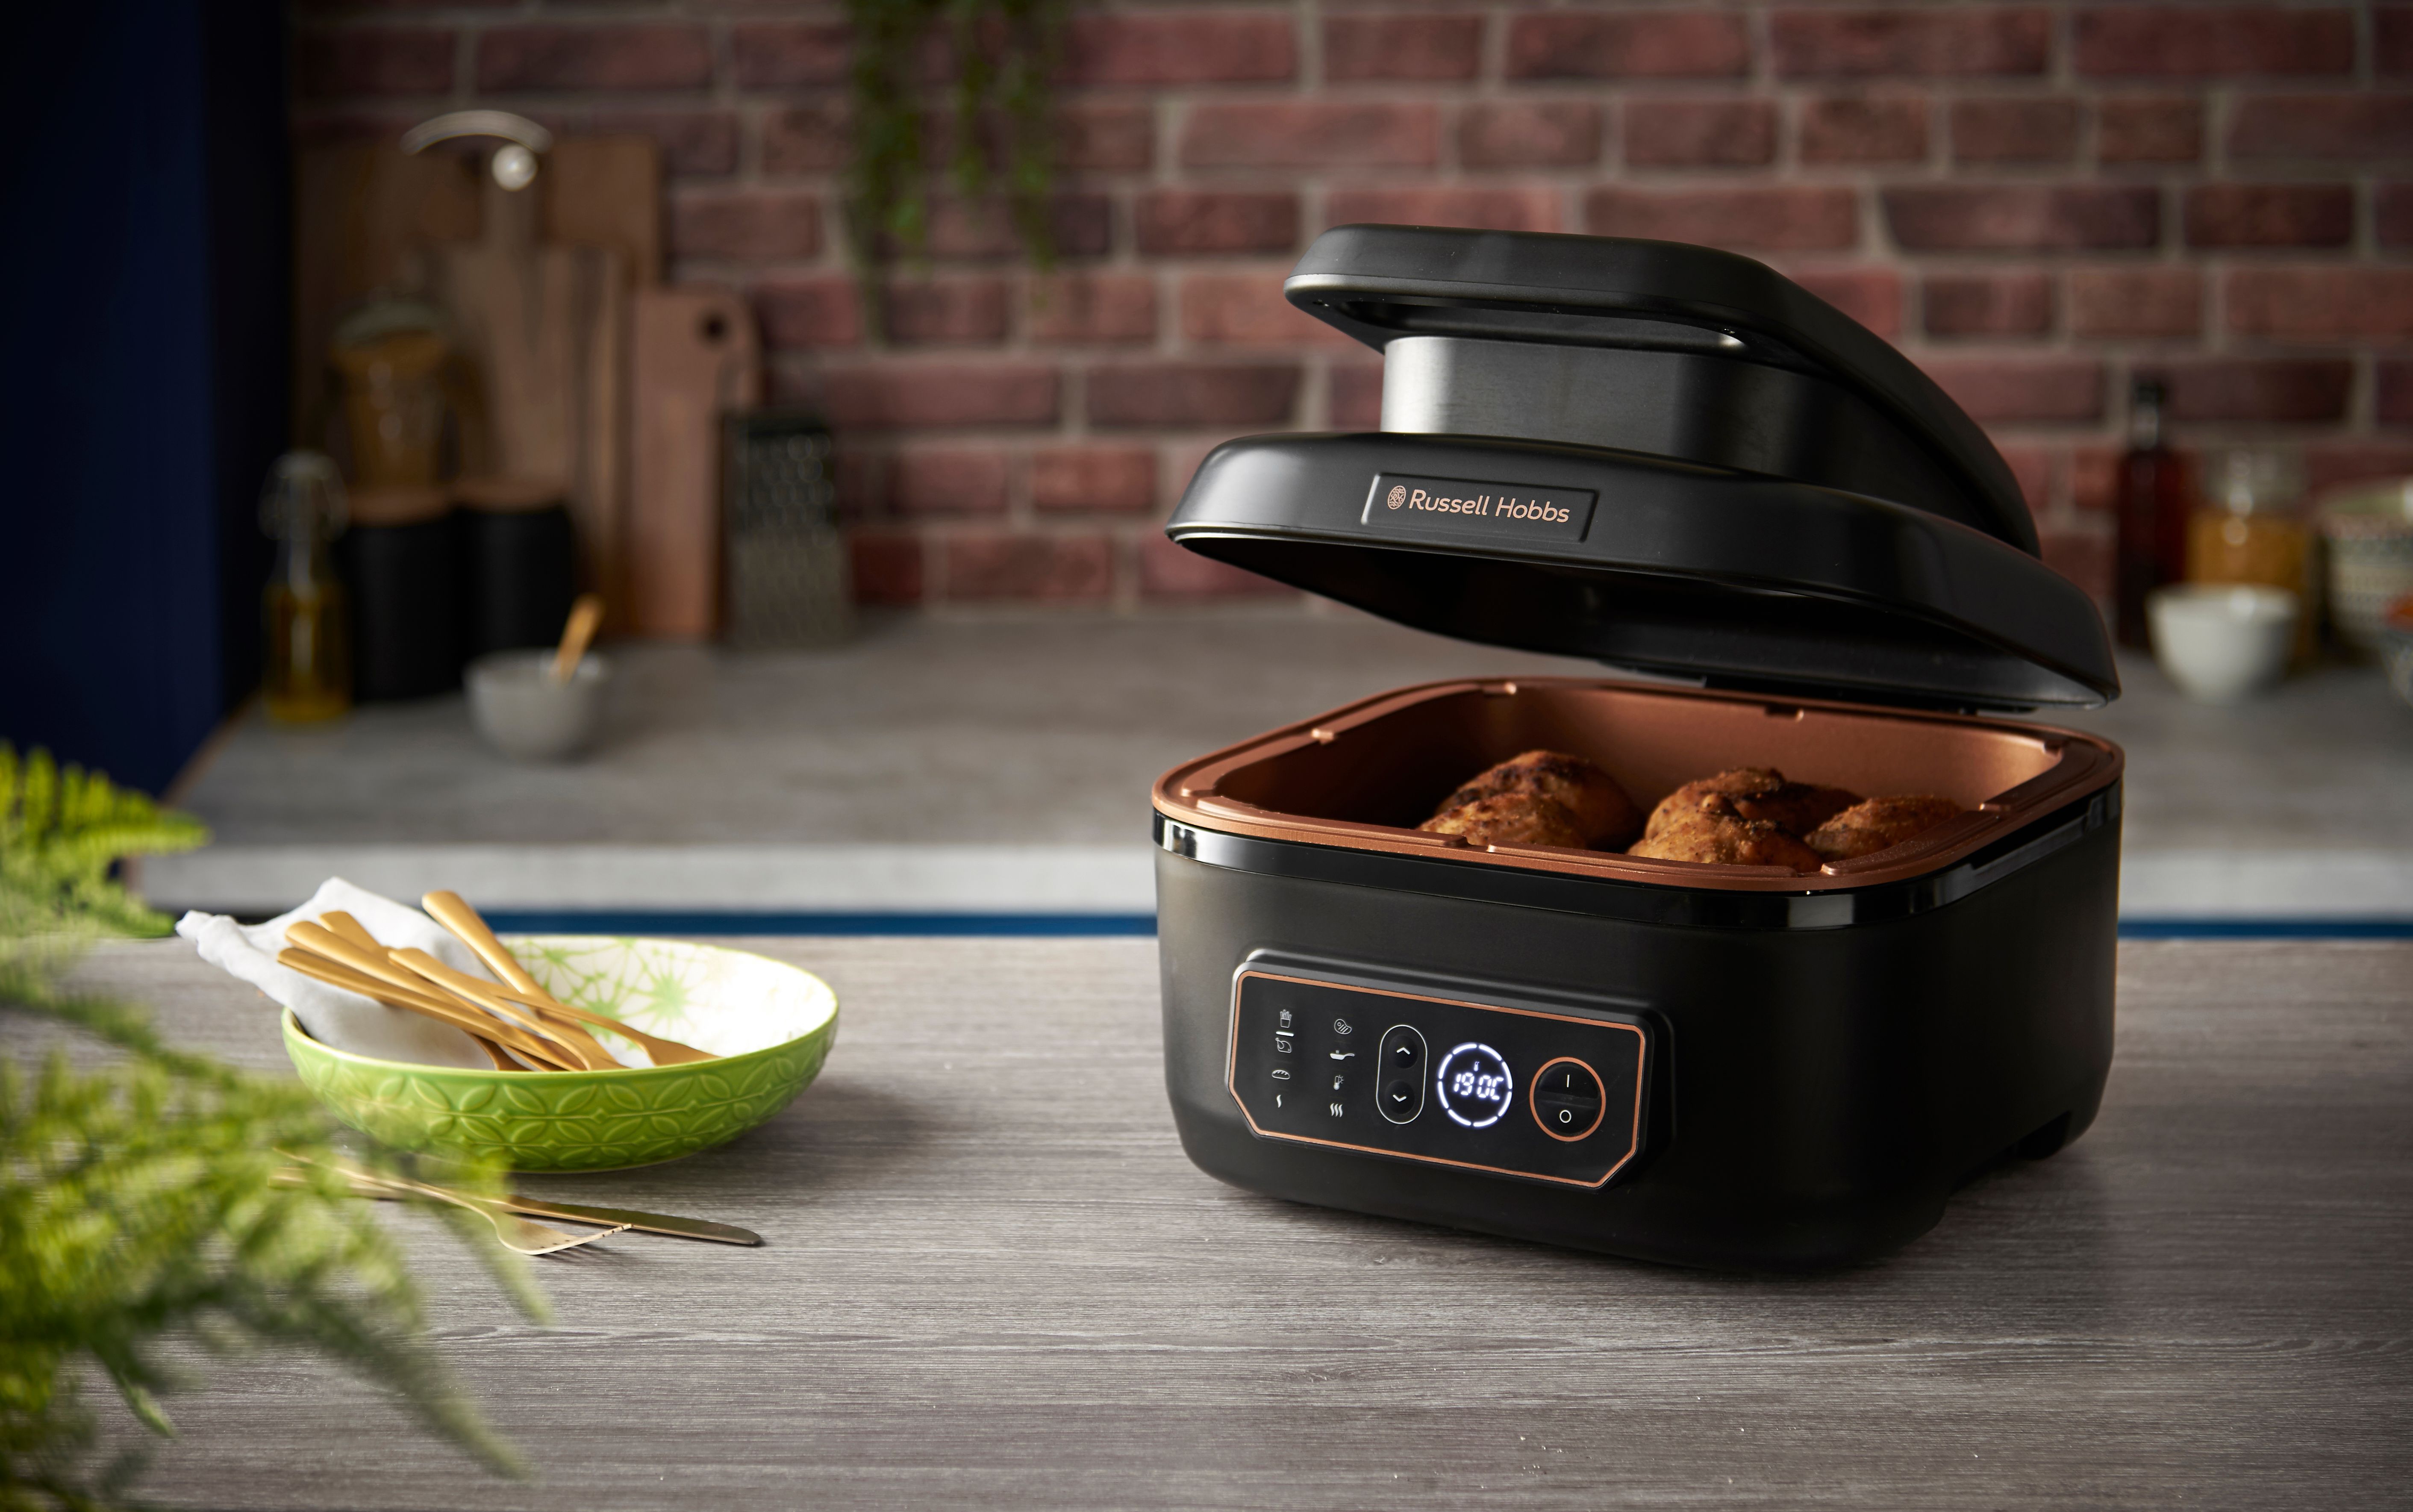 Multi Cooker Air Fryer Grill